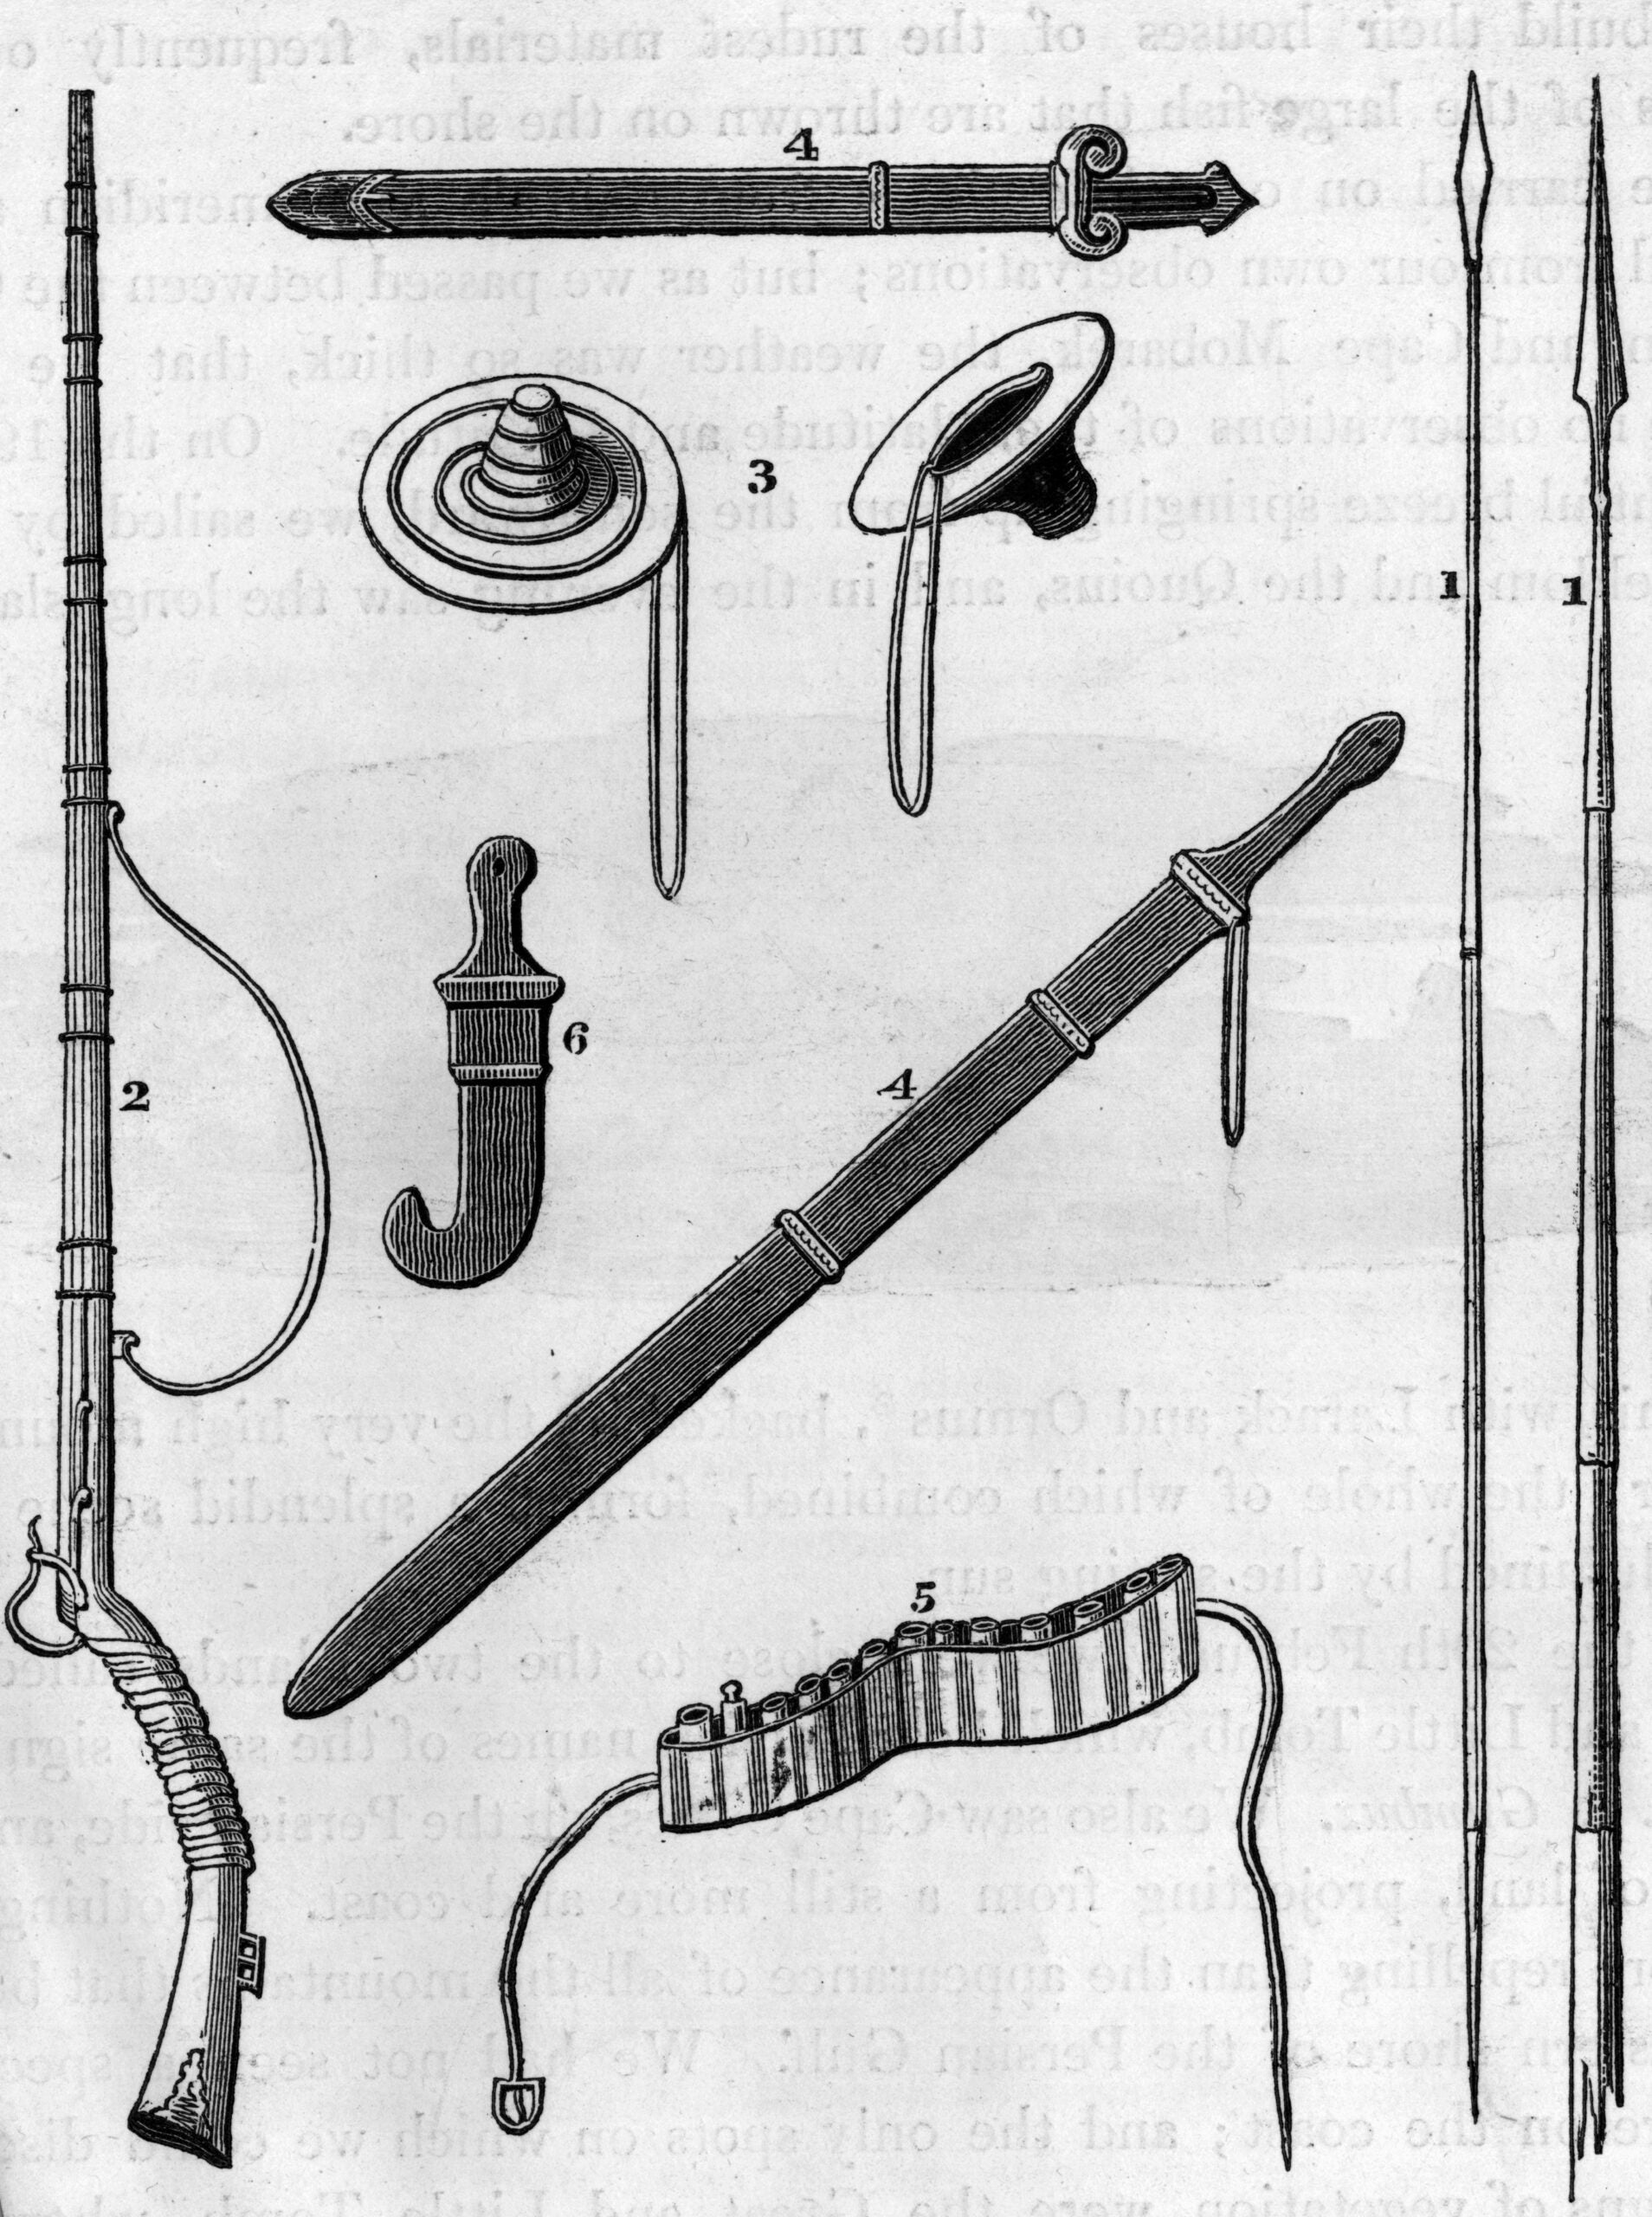 1818:  Various weapons taken from Arab pirates; spears, swords, hand shields, a musket, a cartridge belt and a dagger.  (Photo by Henry Guttmann Collection/Hulton Archive/Getty Images)